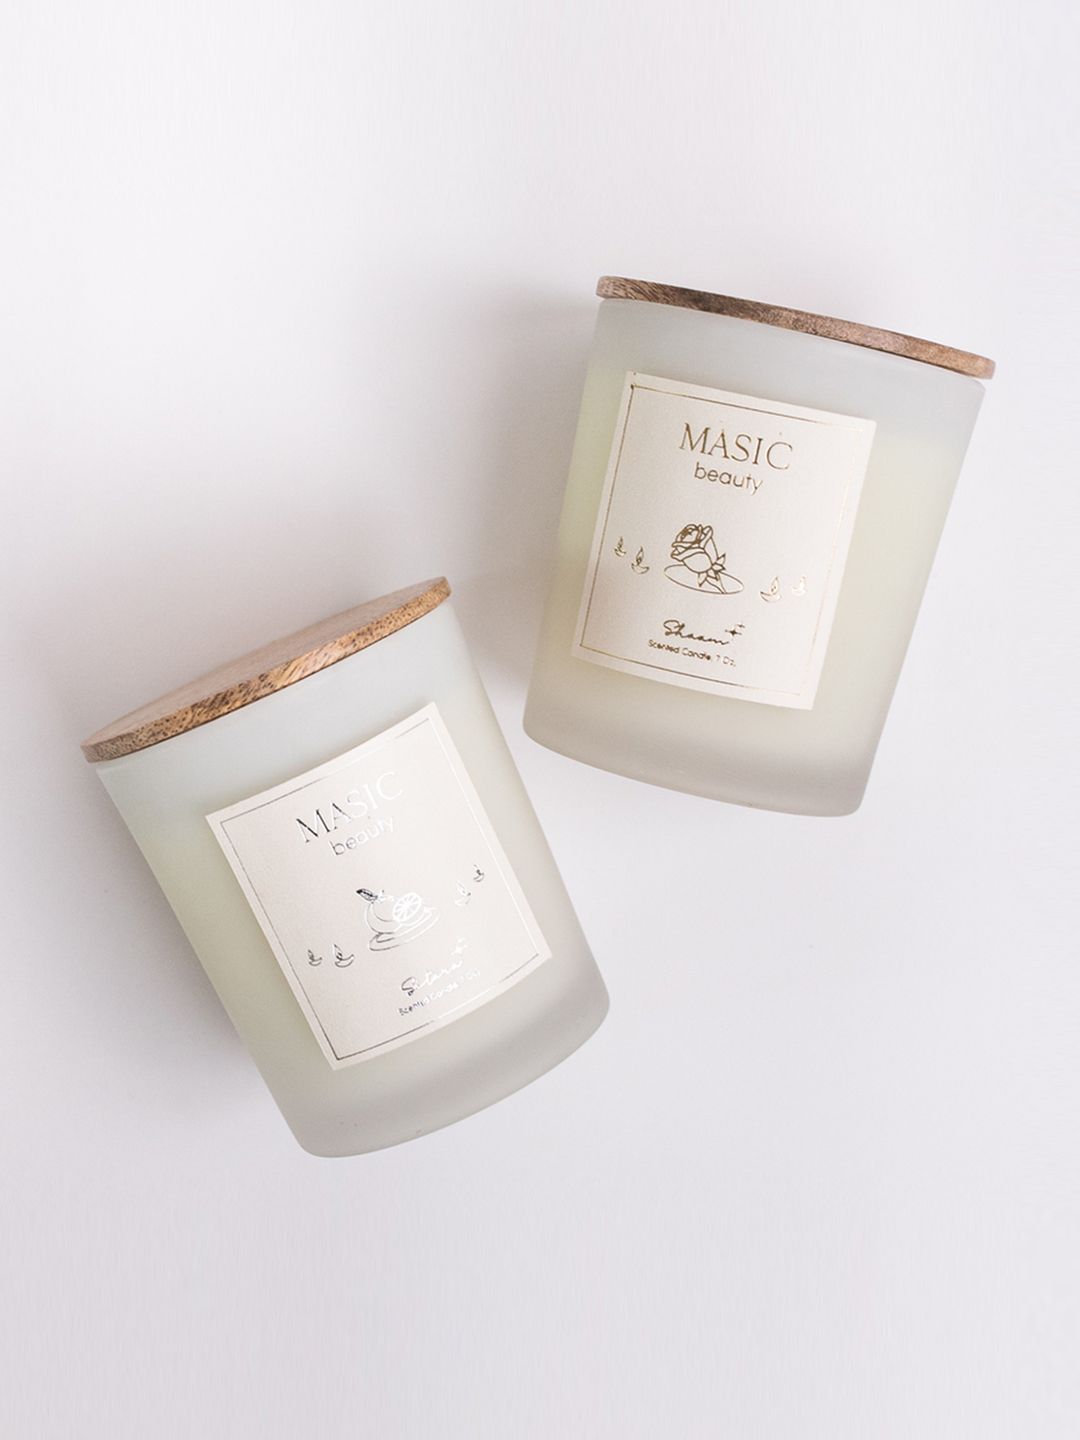 MASIC beauty The Festive Collection - 2 Scented Candles - Shaam & Sitara - 200g each Price in India